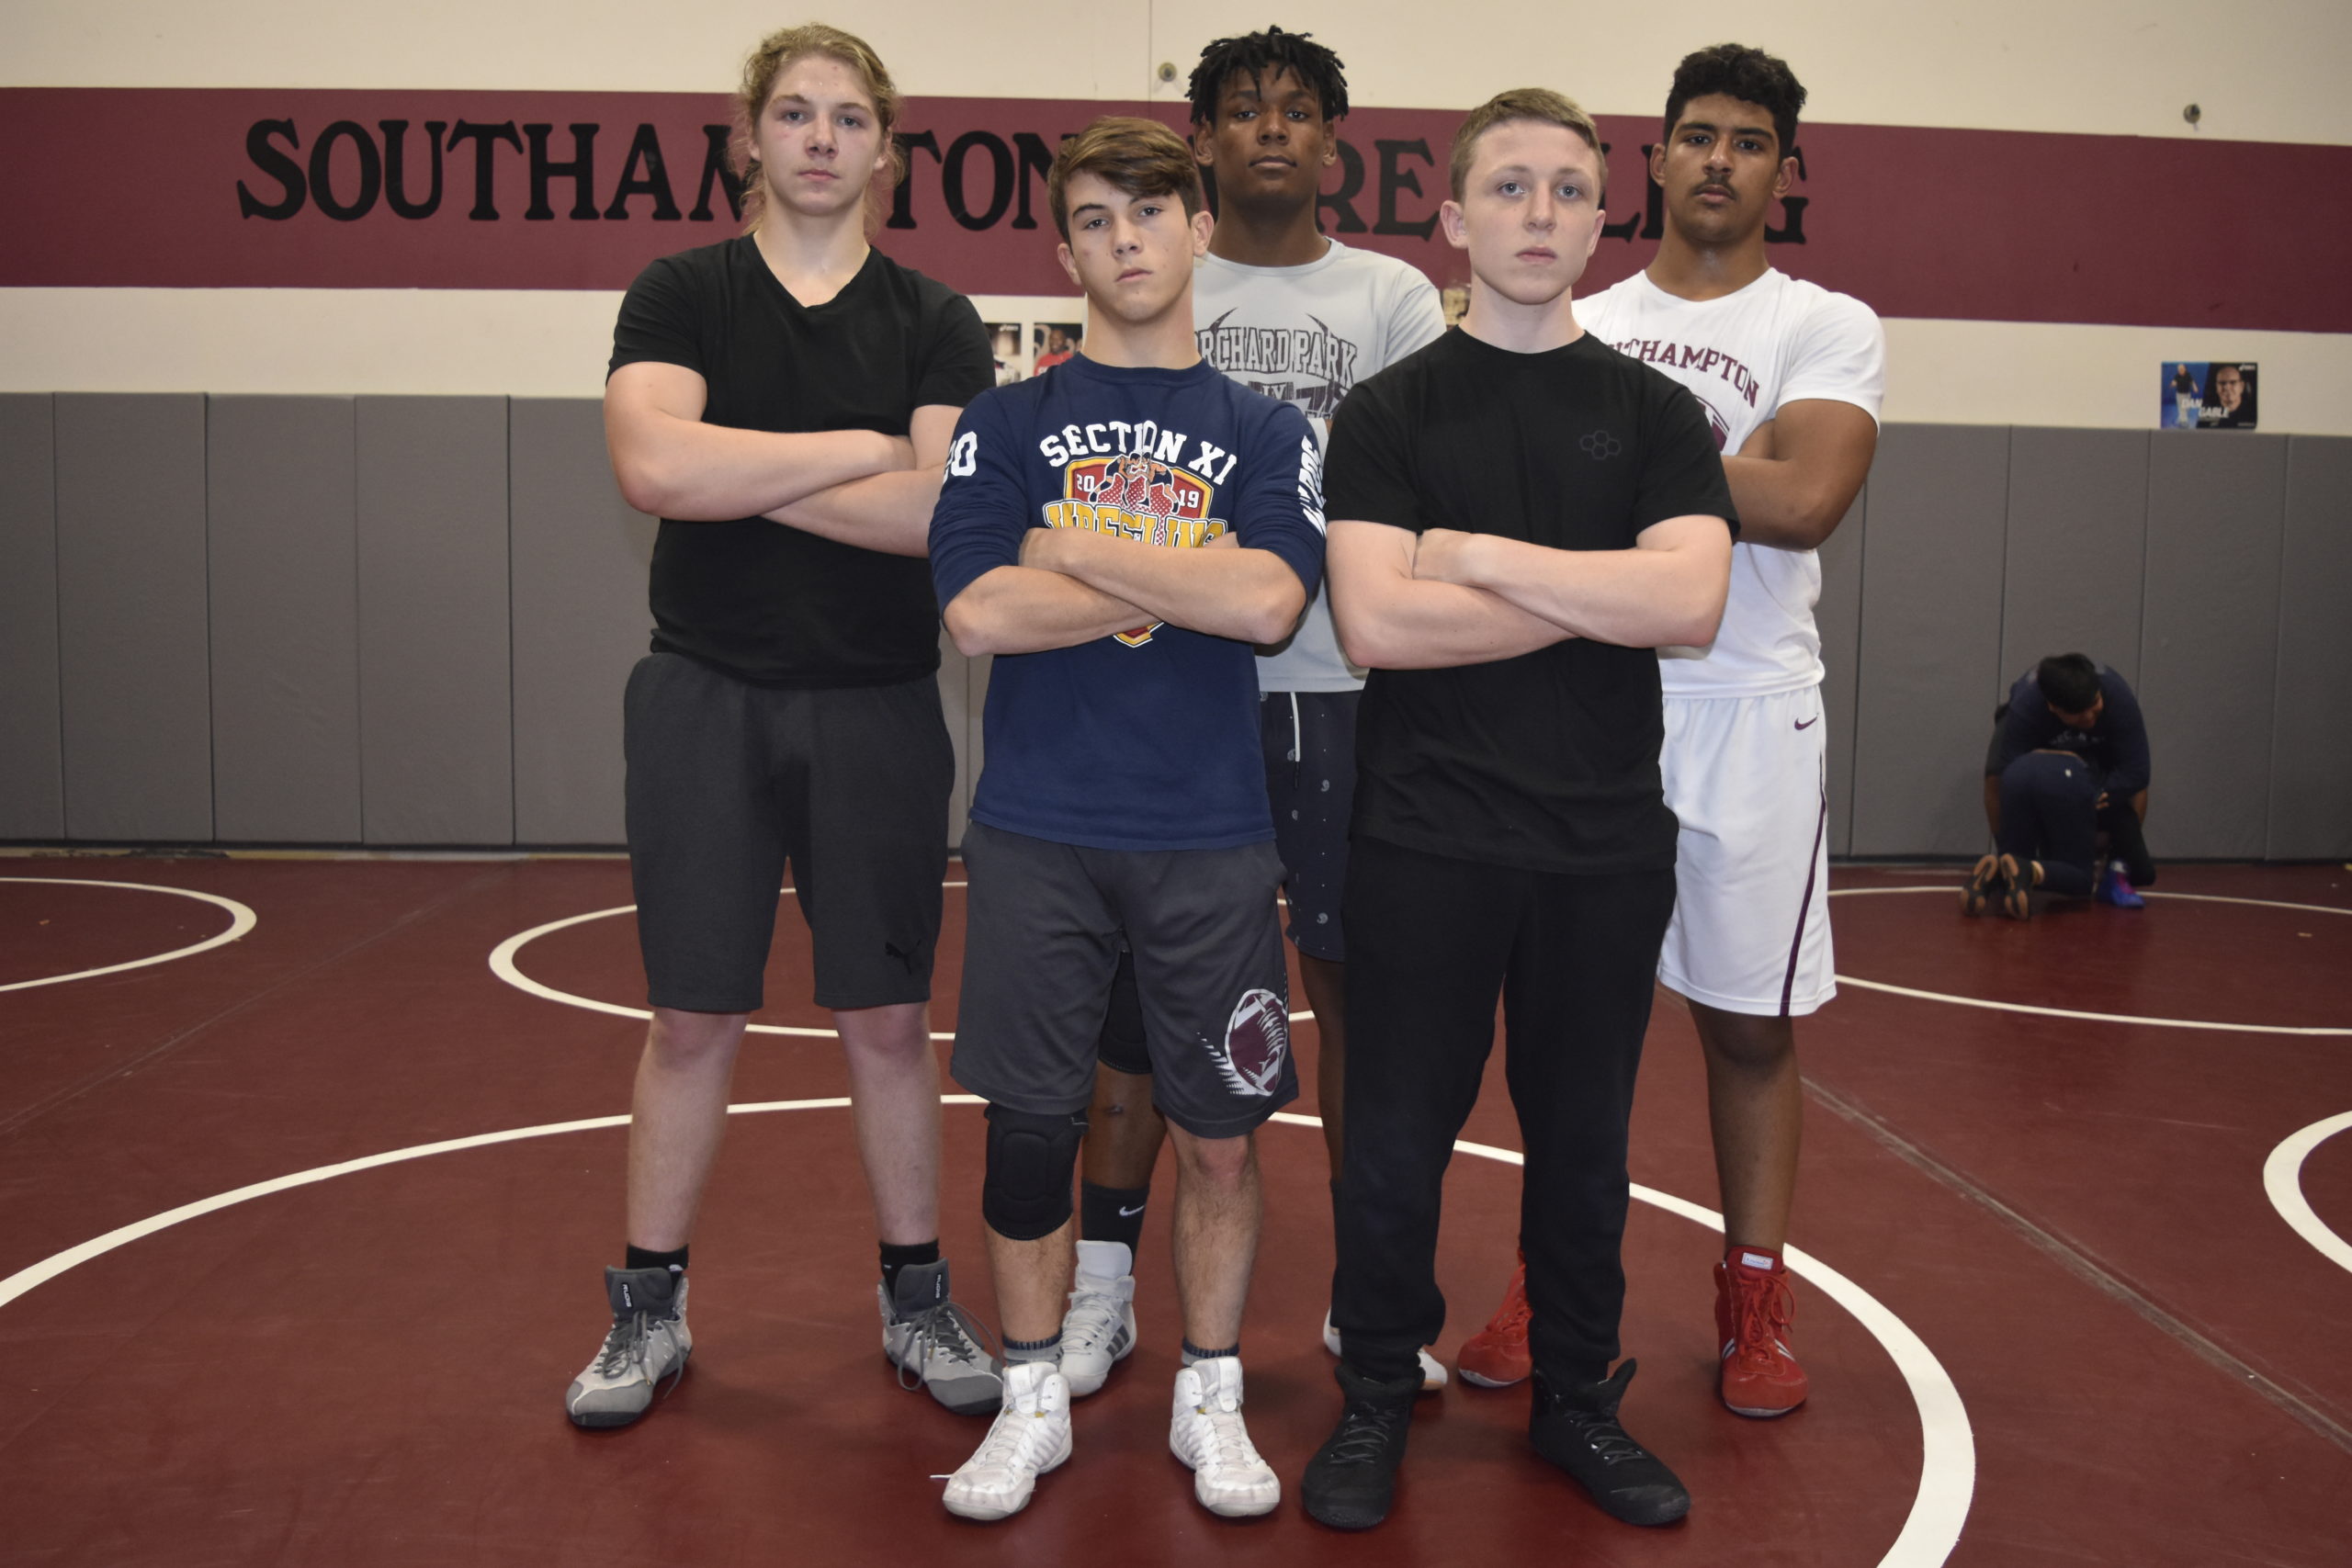 Key returning wrestlers for the Mariners this season include, from top left, Bradley Bockhaus, Ben Brown, Zayden Michel, and from bottom left, Alex Boyd and Riley Lenahan.